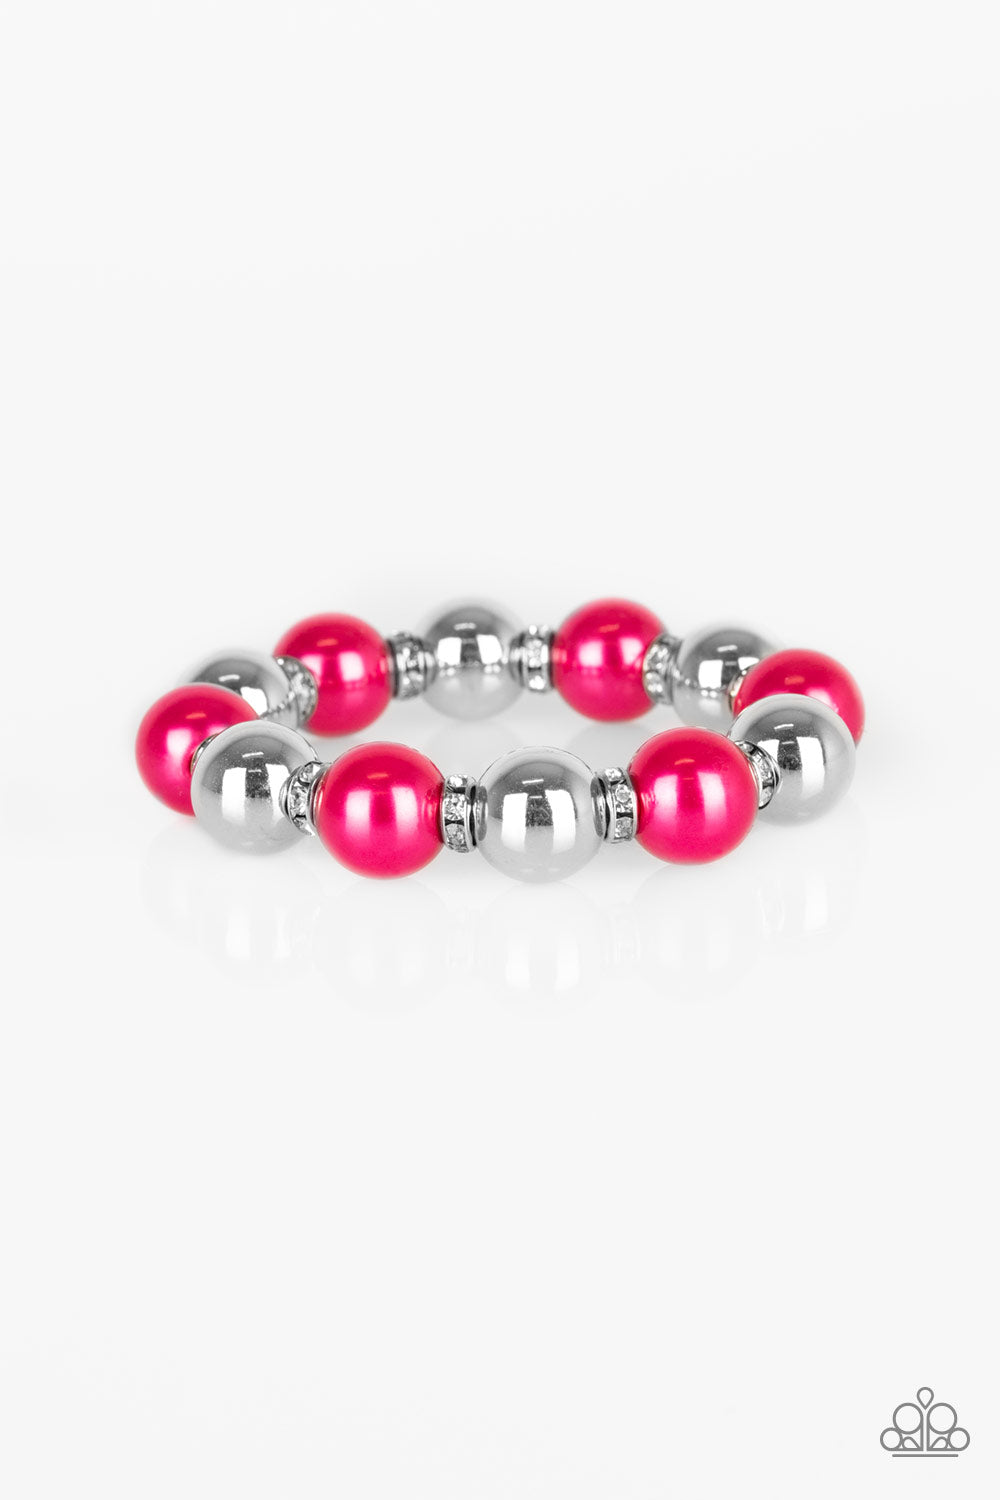 SO NOT SORRY - PINK PEARLS AND SILVER STRETCH BRACELET